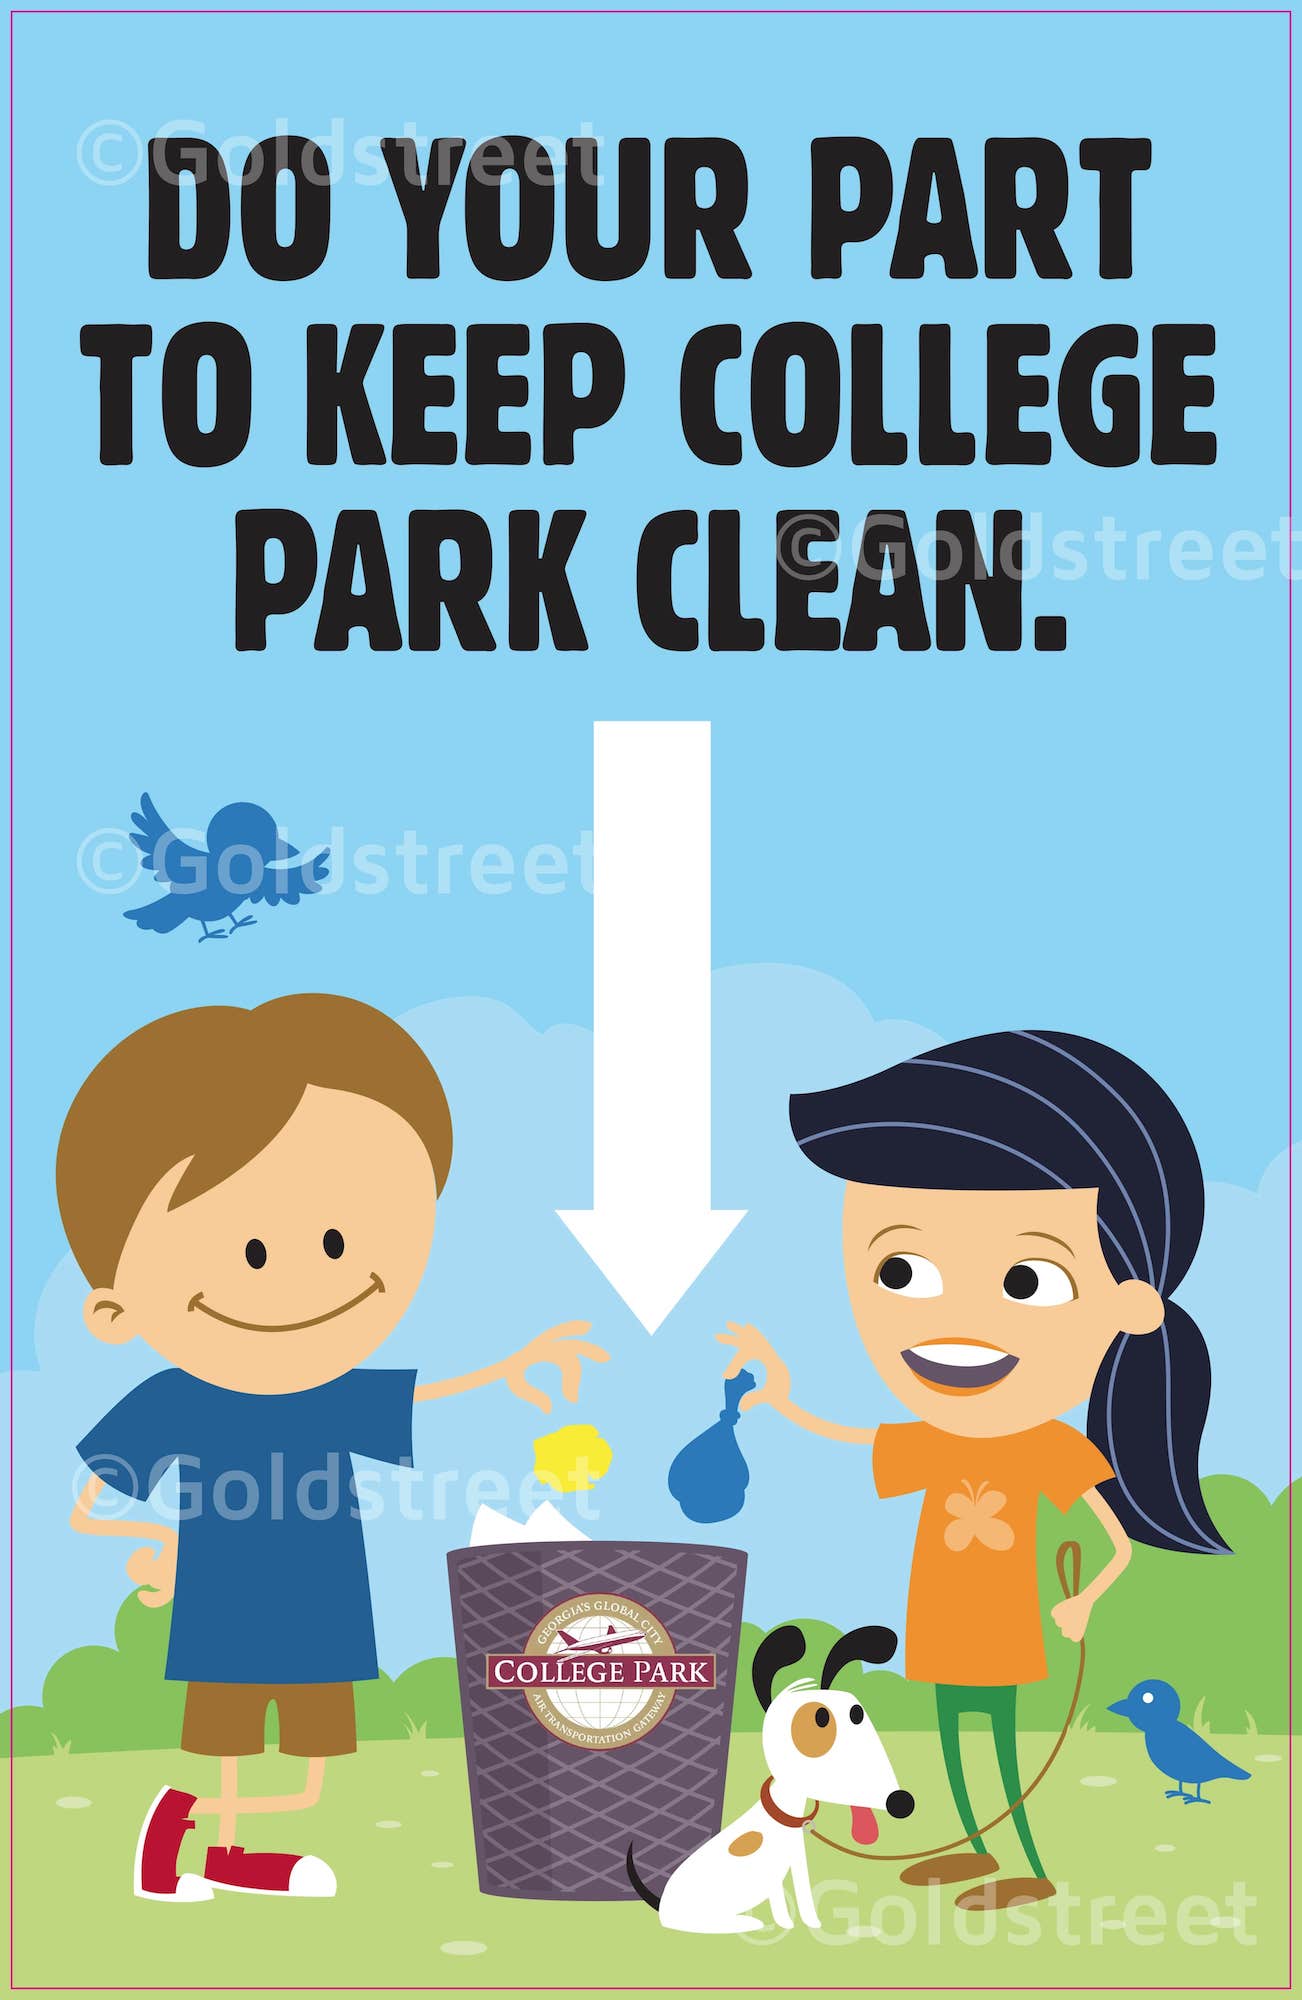 Keep your park clean